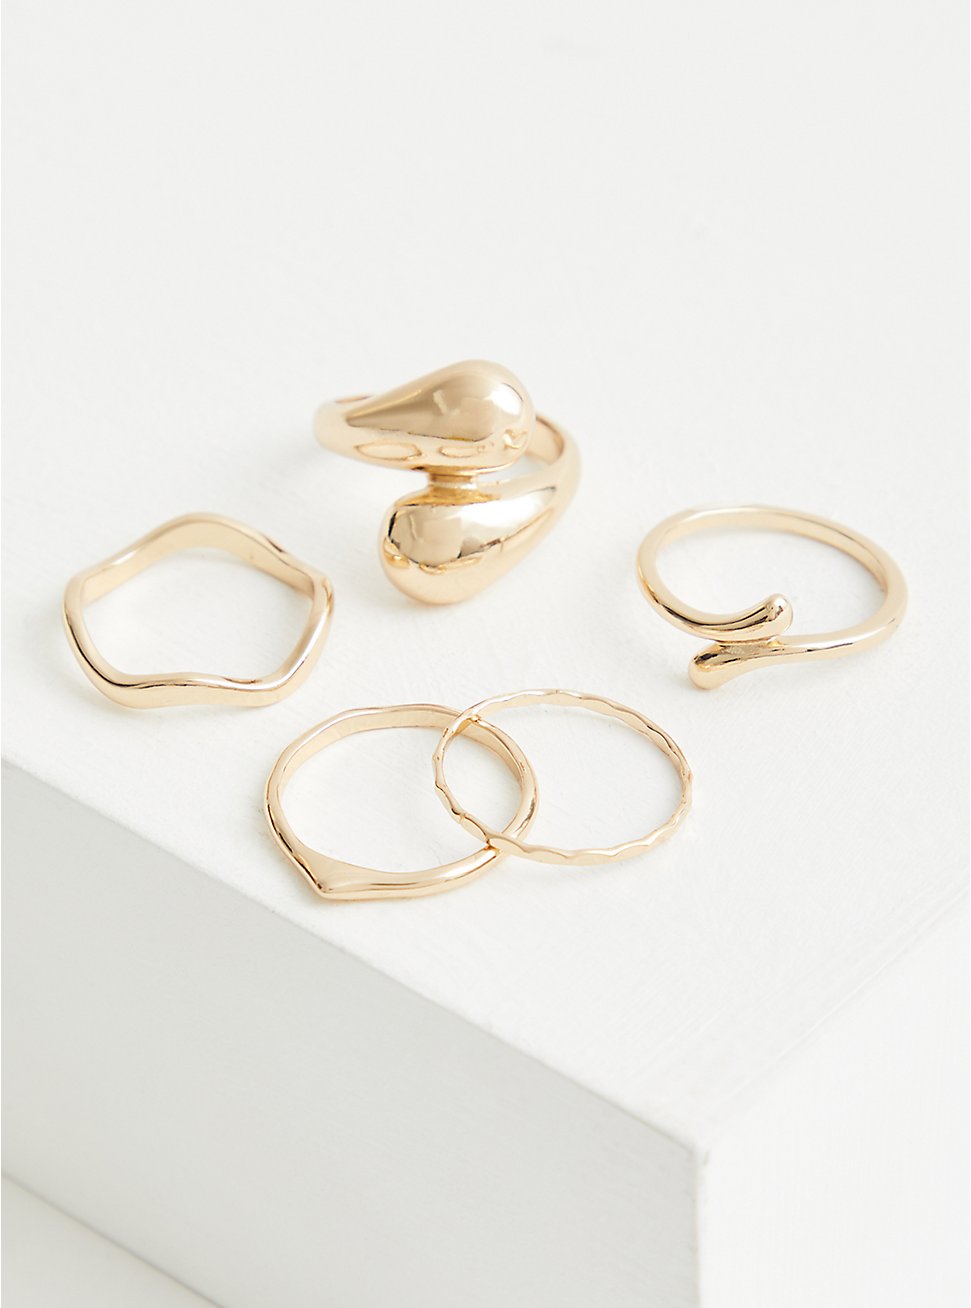 Crossover Ring Set of 5 - Gold Tone , GOLD, hi-res